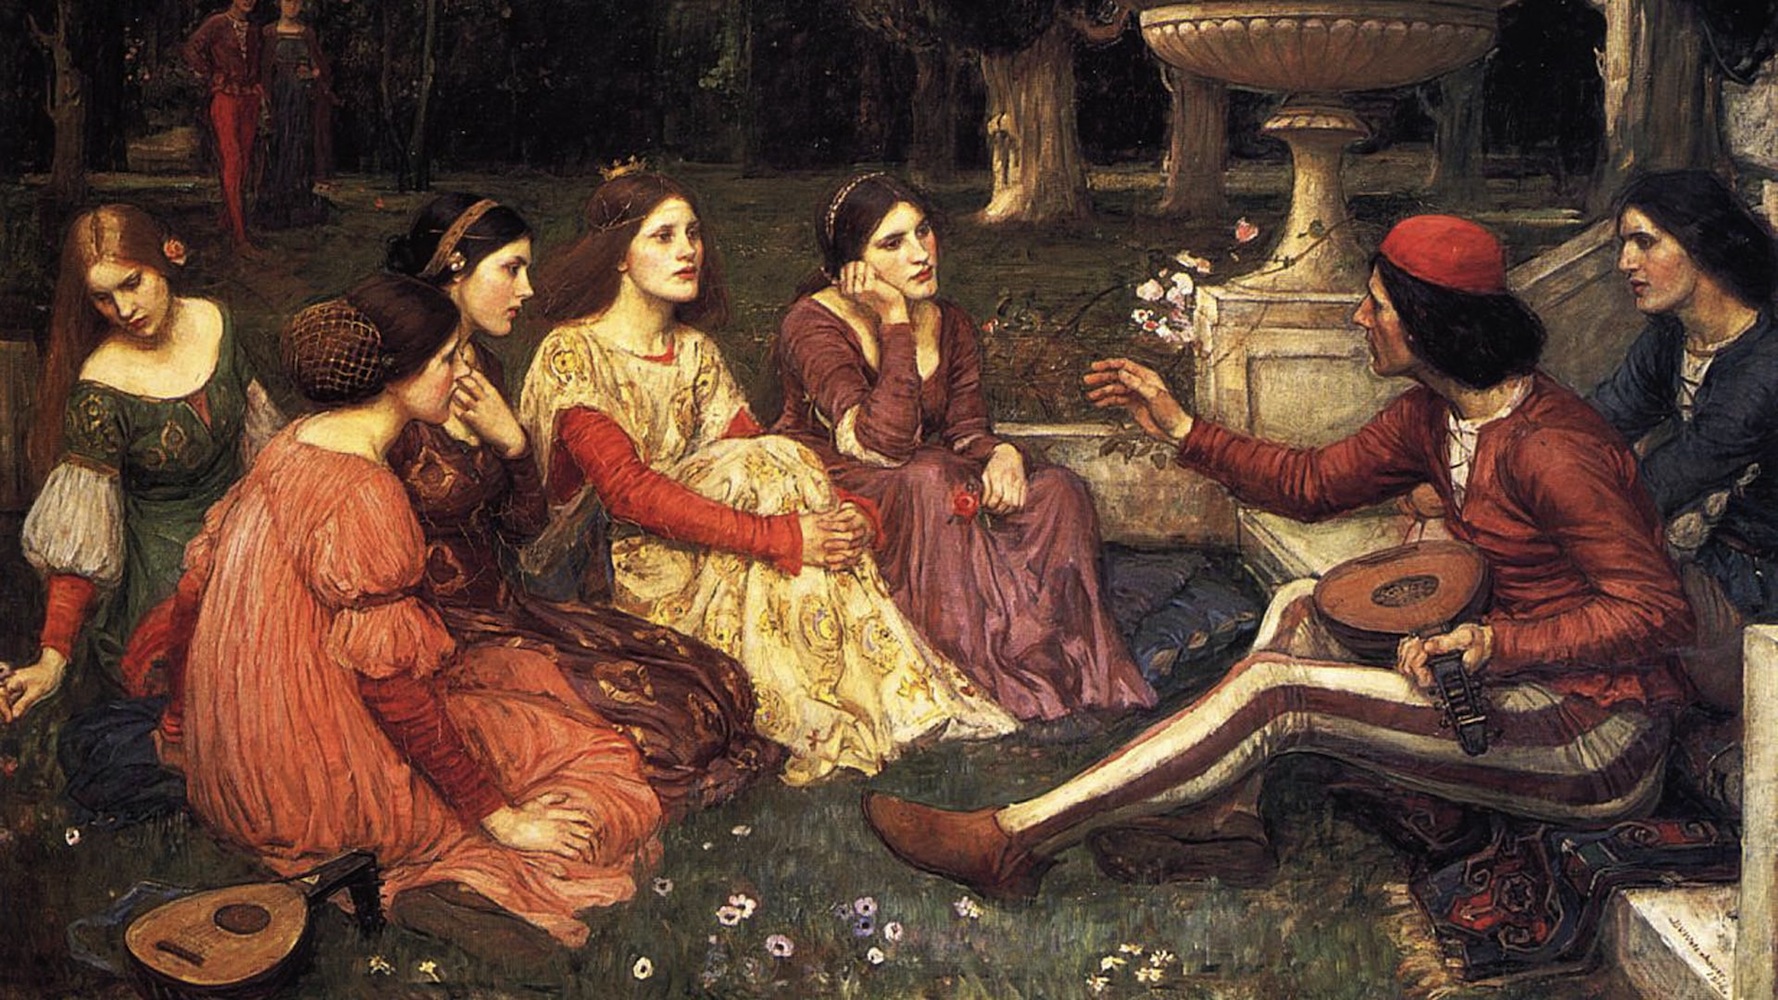 John_William_Waterhouse_A_tale_from_the_Decameron_1916.jpg